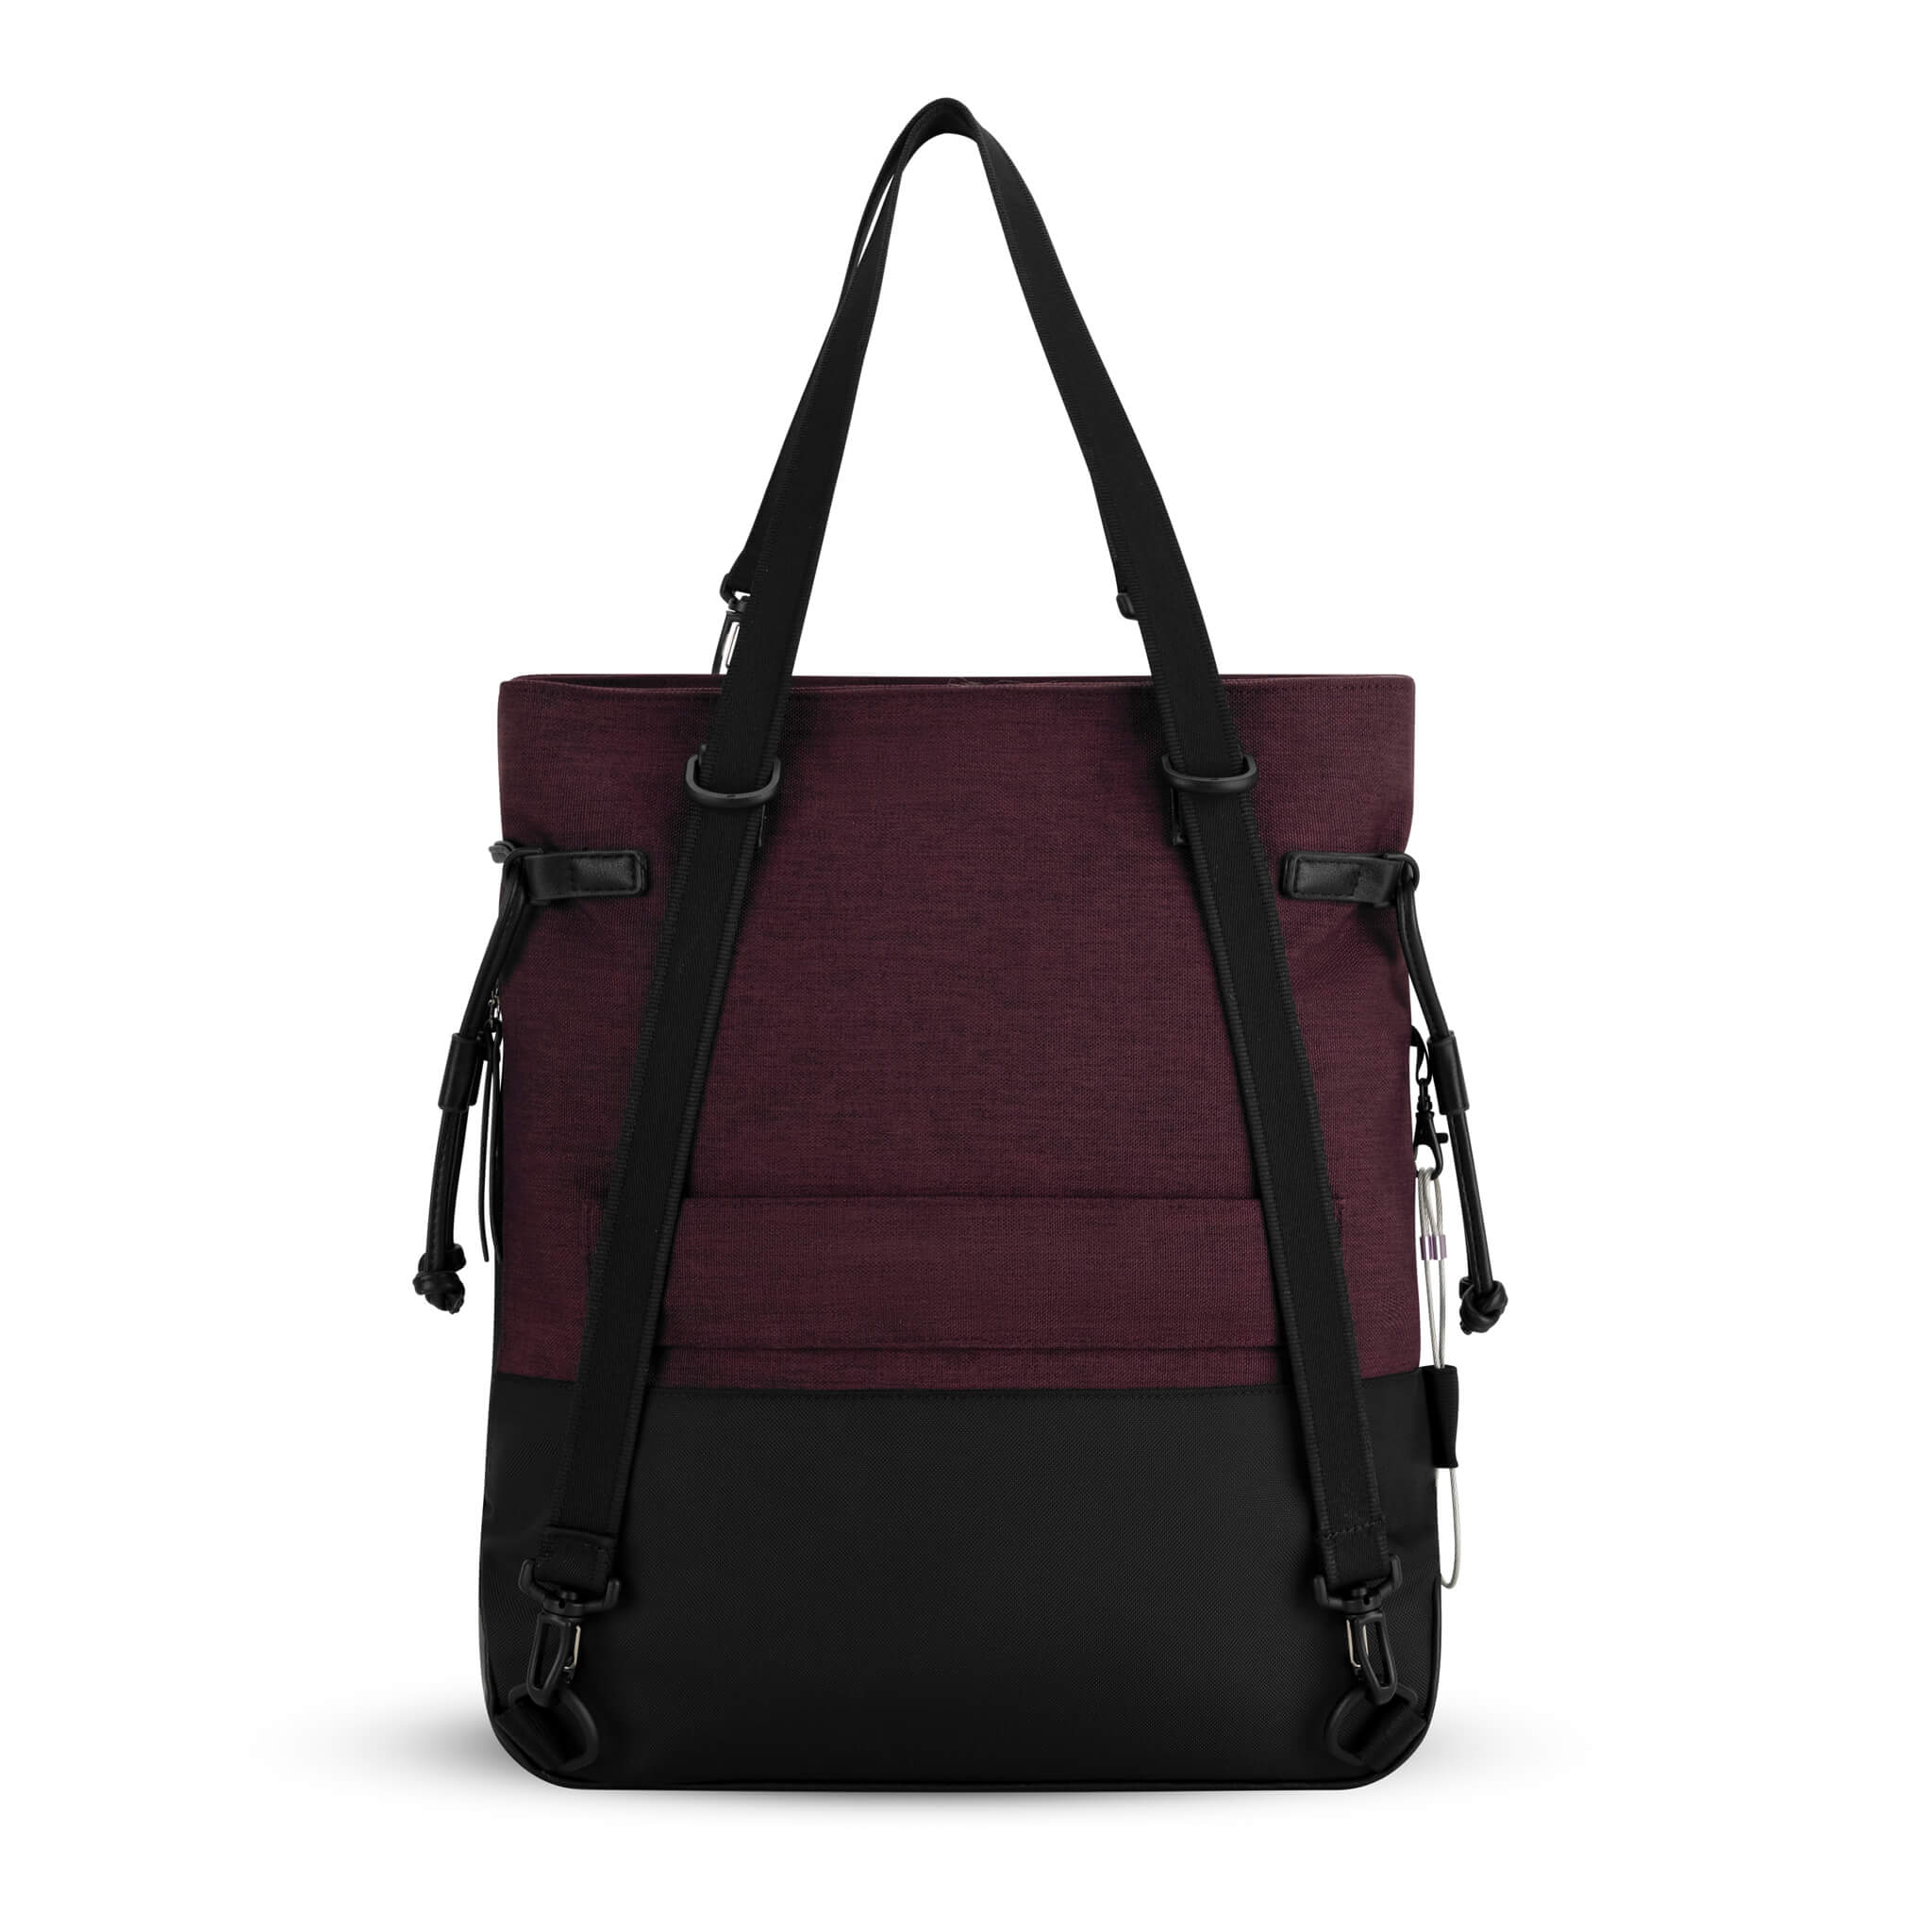 Back view of Sherpani Anti-Theft tote backpack, the Tempest in Merlot. The convertible bag includes RFID protection, locking zipper pockets, adjustable straps, and a trolley sleeve. 